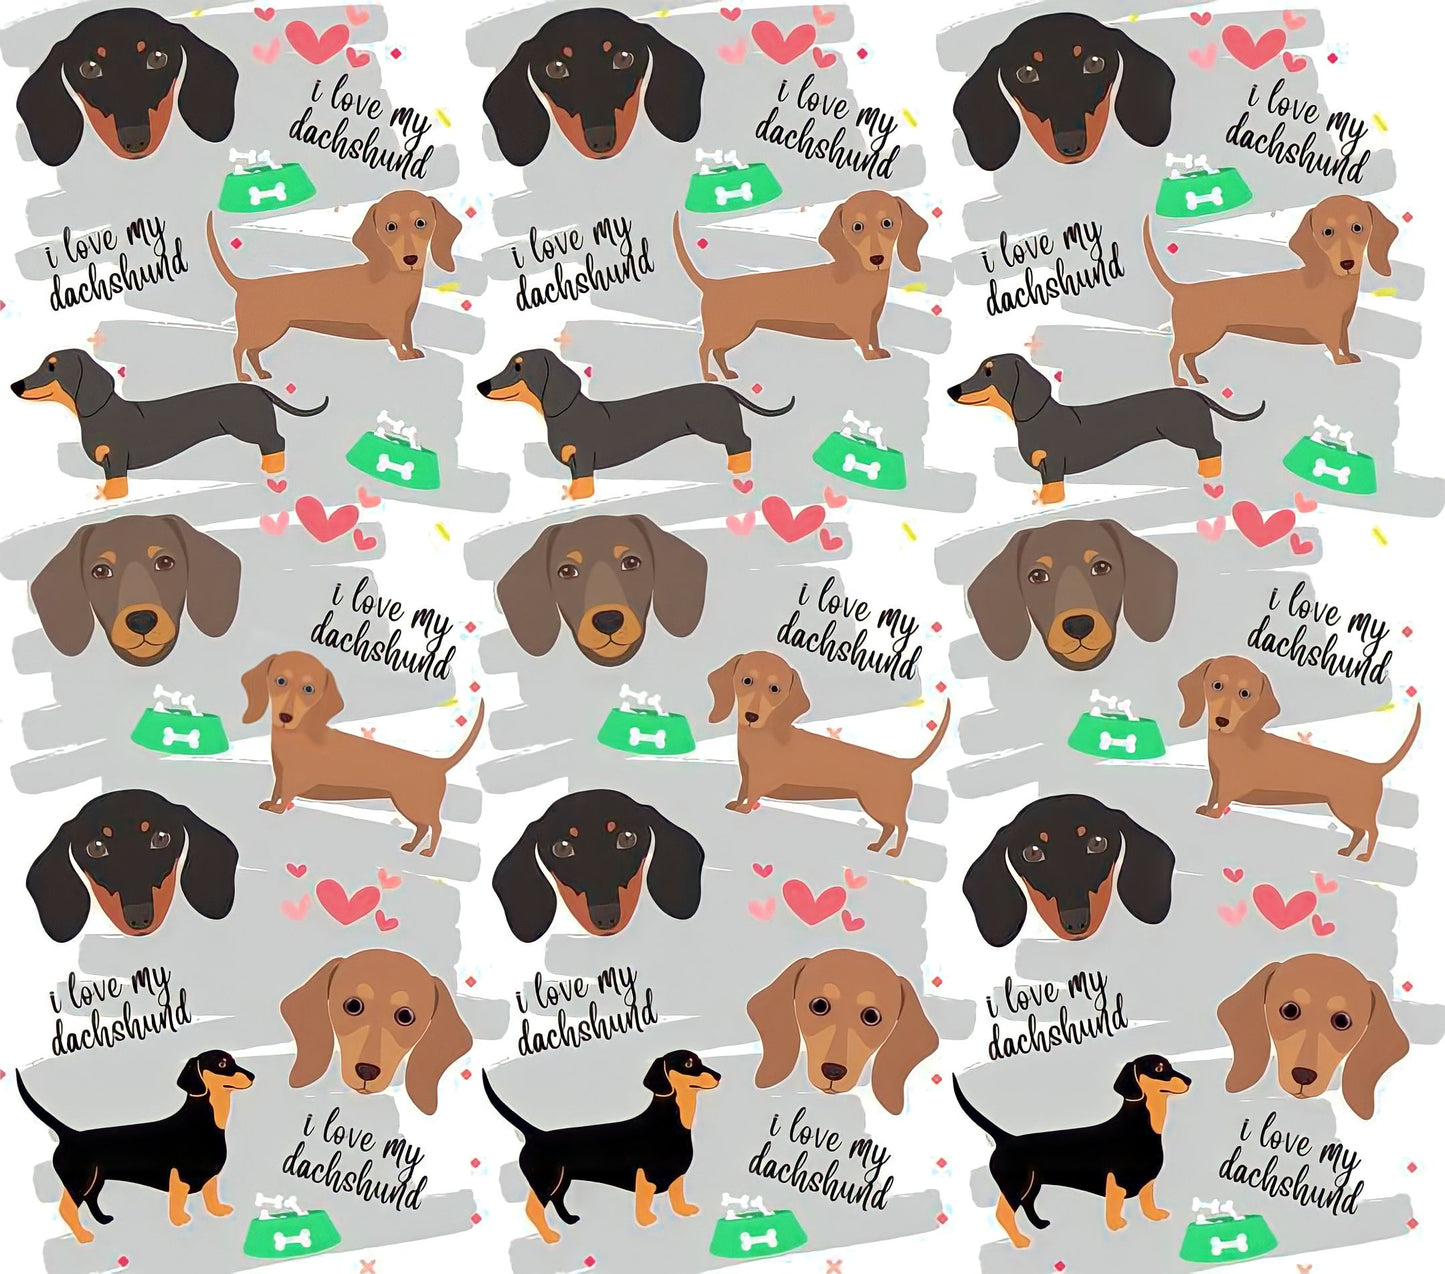 Dachshund Appreciation - "I Love My Dachshund" - Assorted Colored Dogs - Silver w/ White Background - 20 Oz Sublimation Transfer